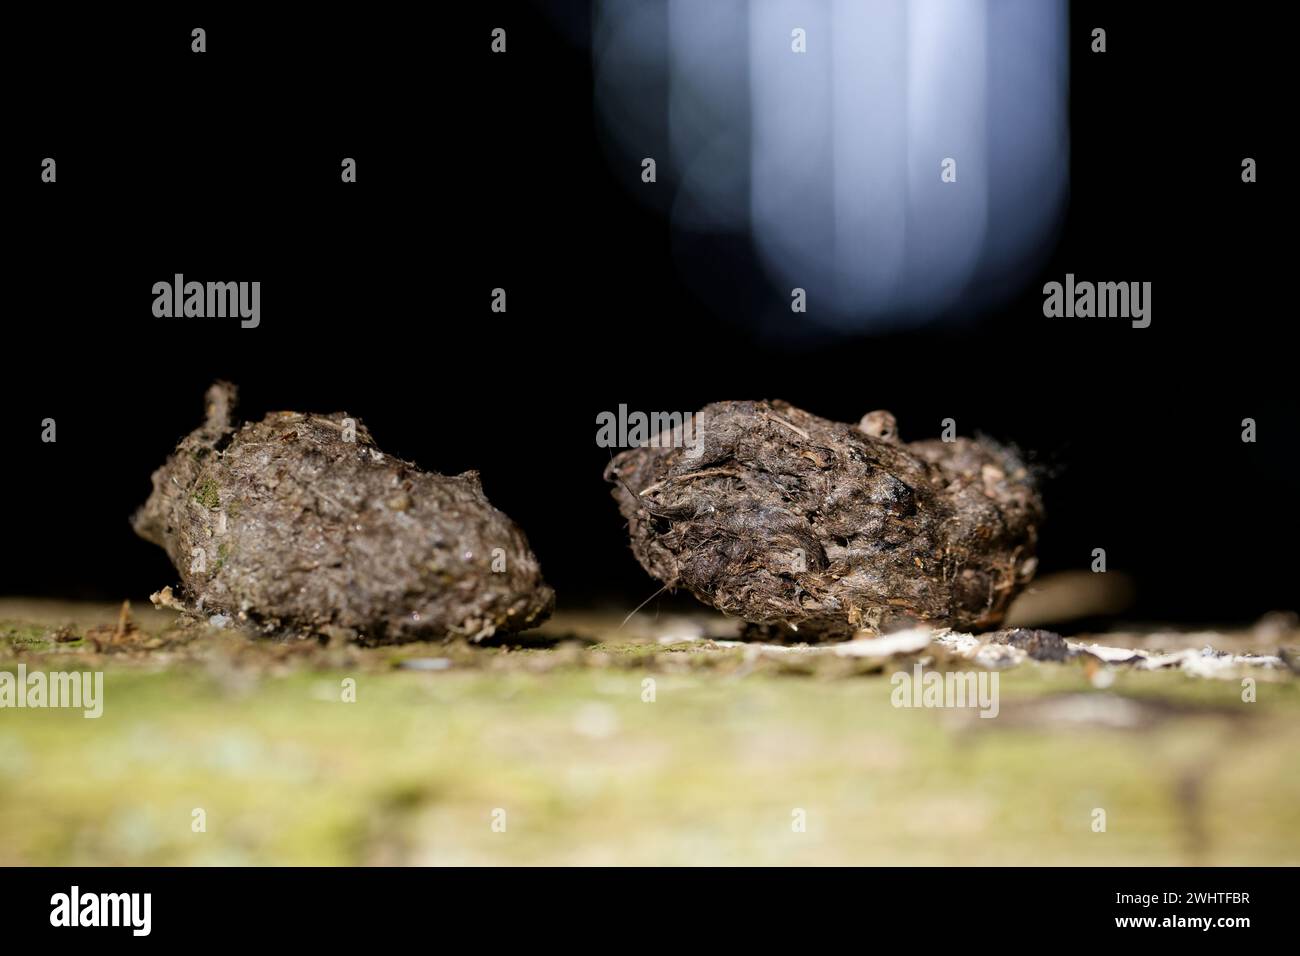 Tawny owl pellet (Strix aluco) in an old abandoned barn Stock Photo